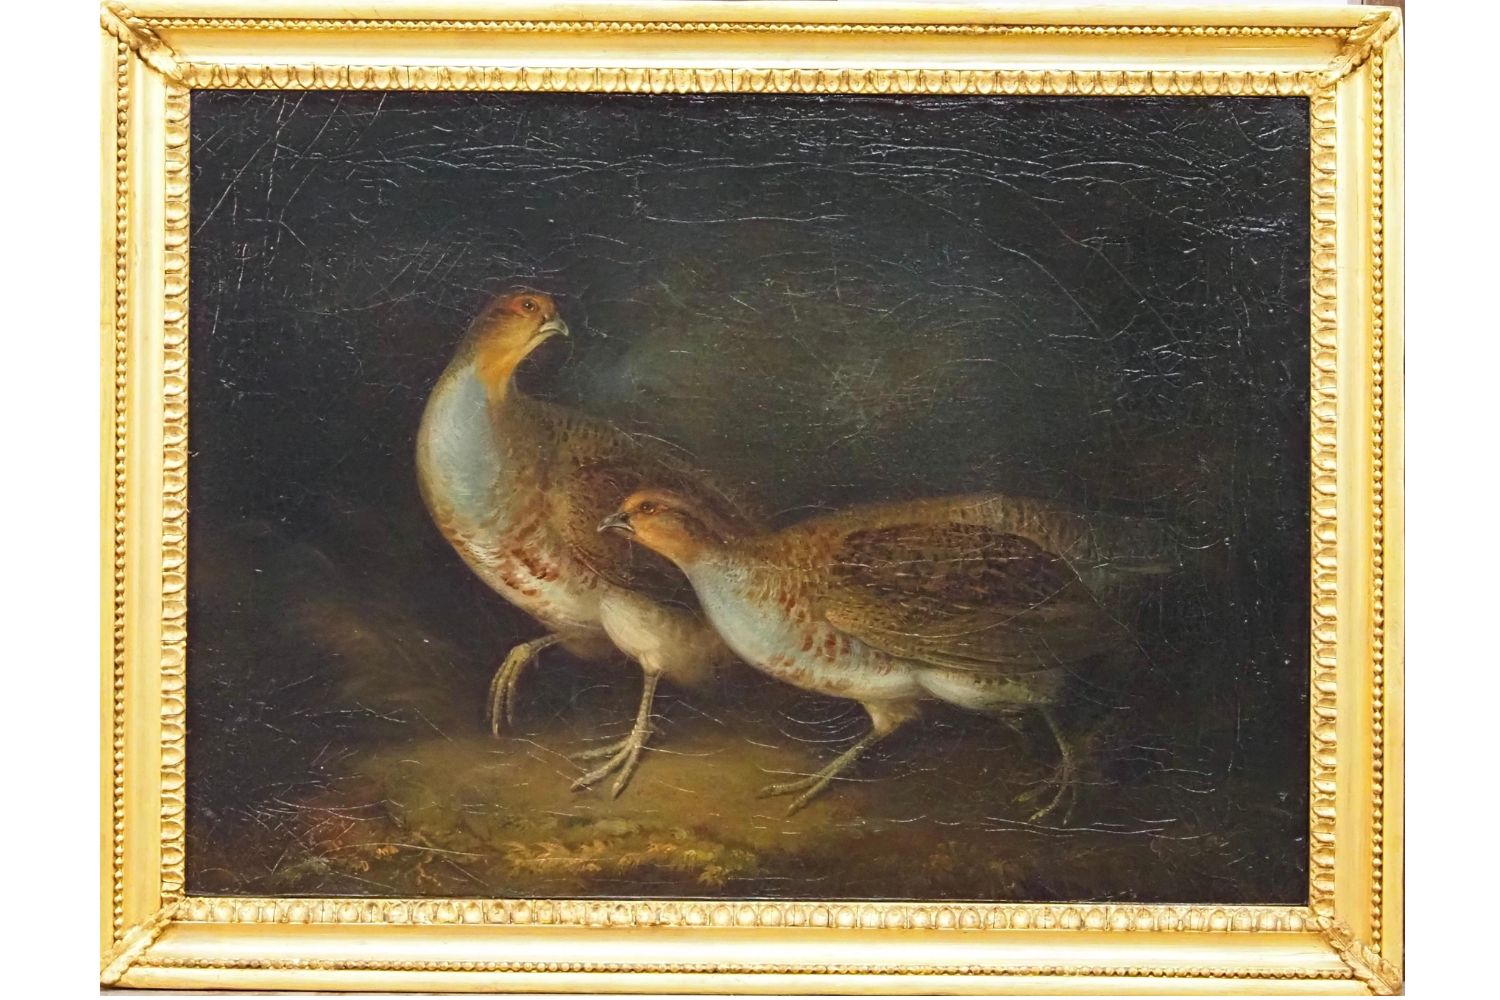 The Best Places to Buy Art Online Options: Stephen Elmer, Two Partridges in a Woodland